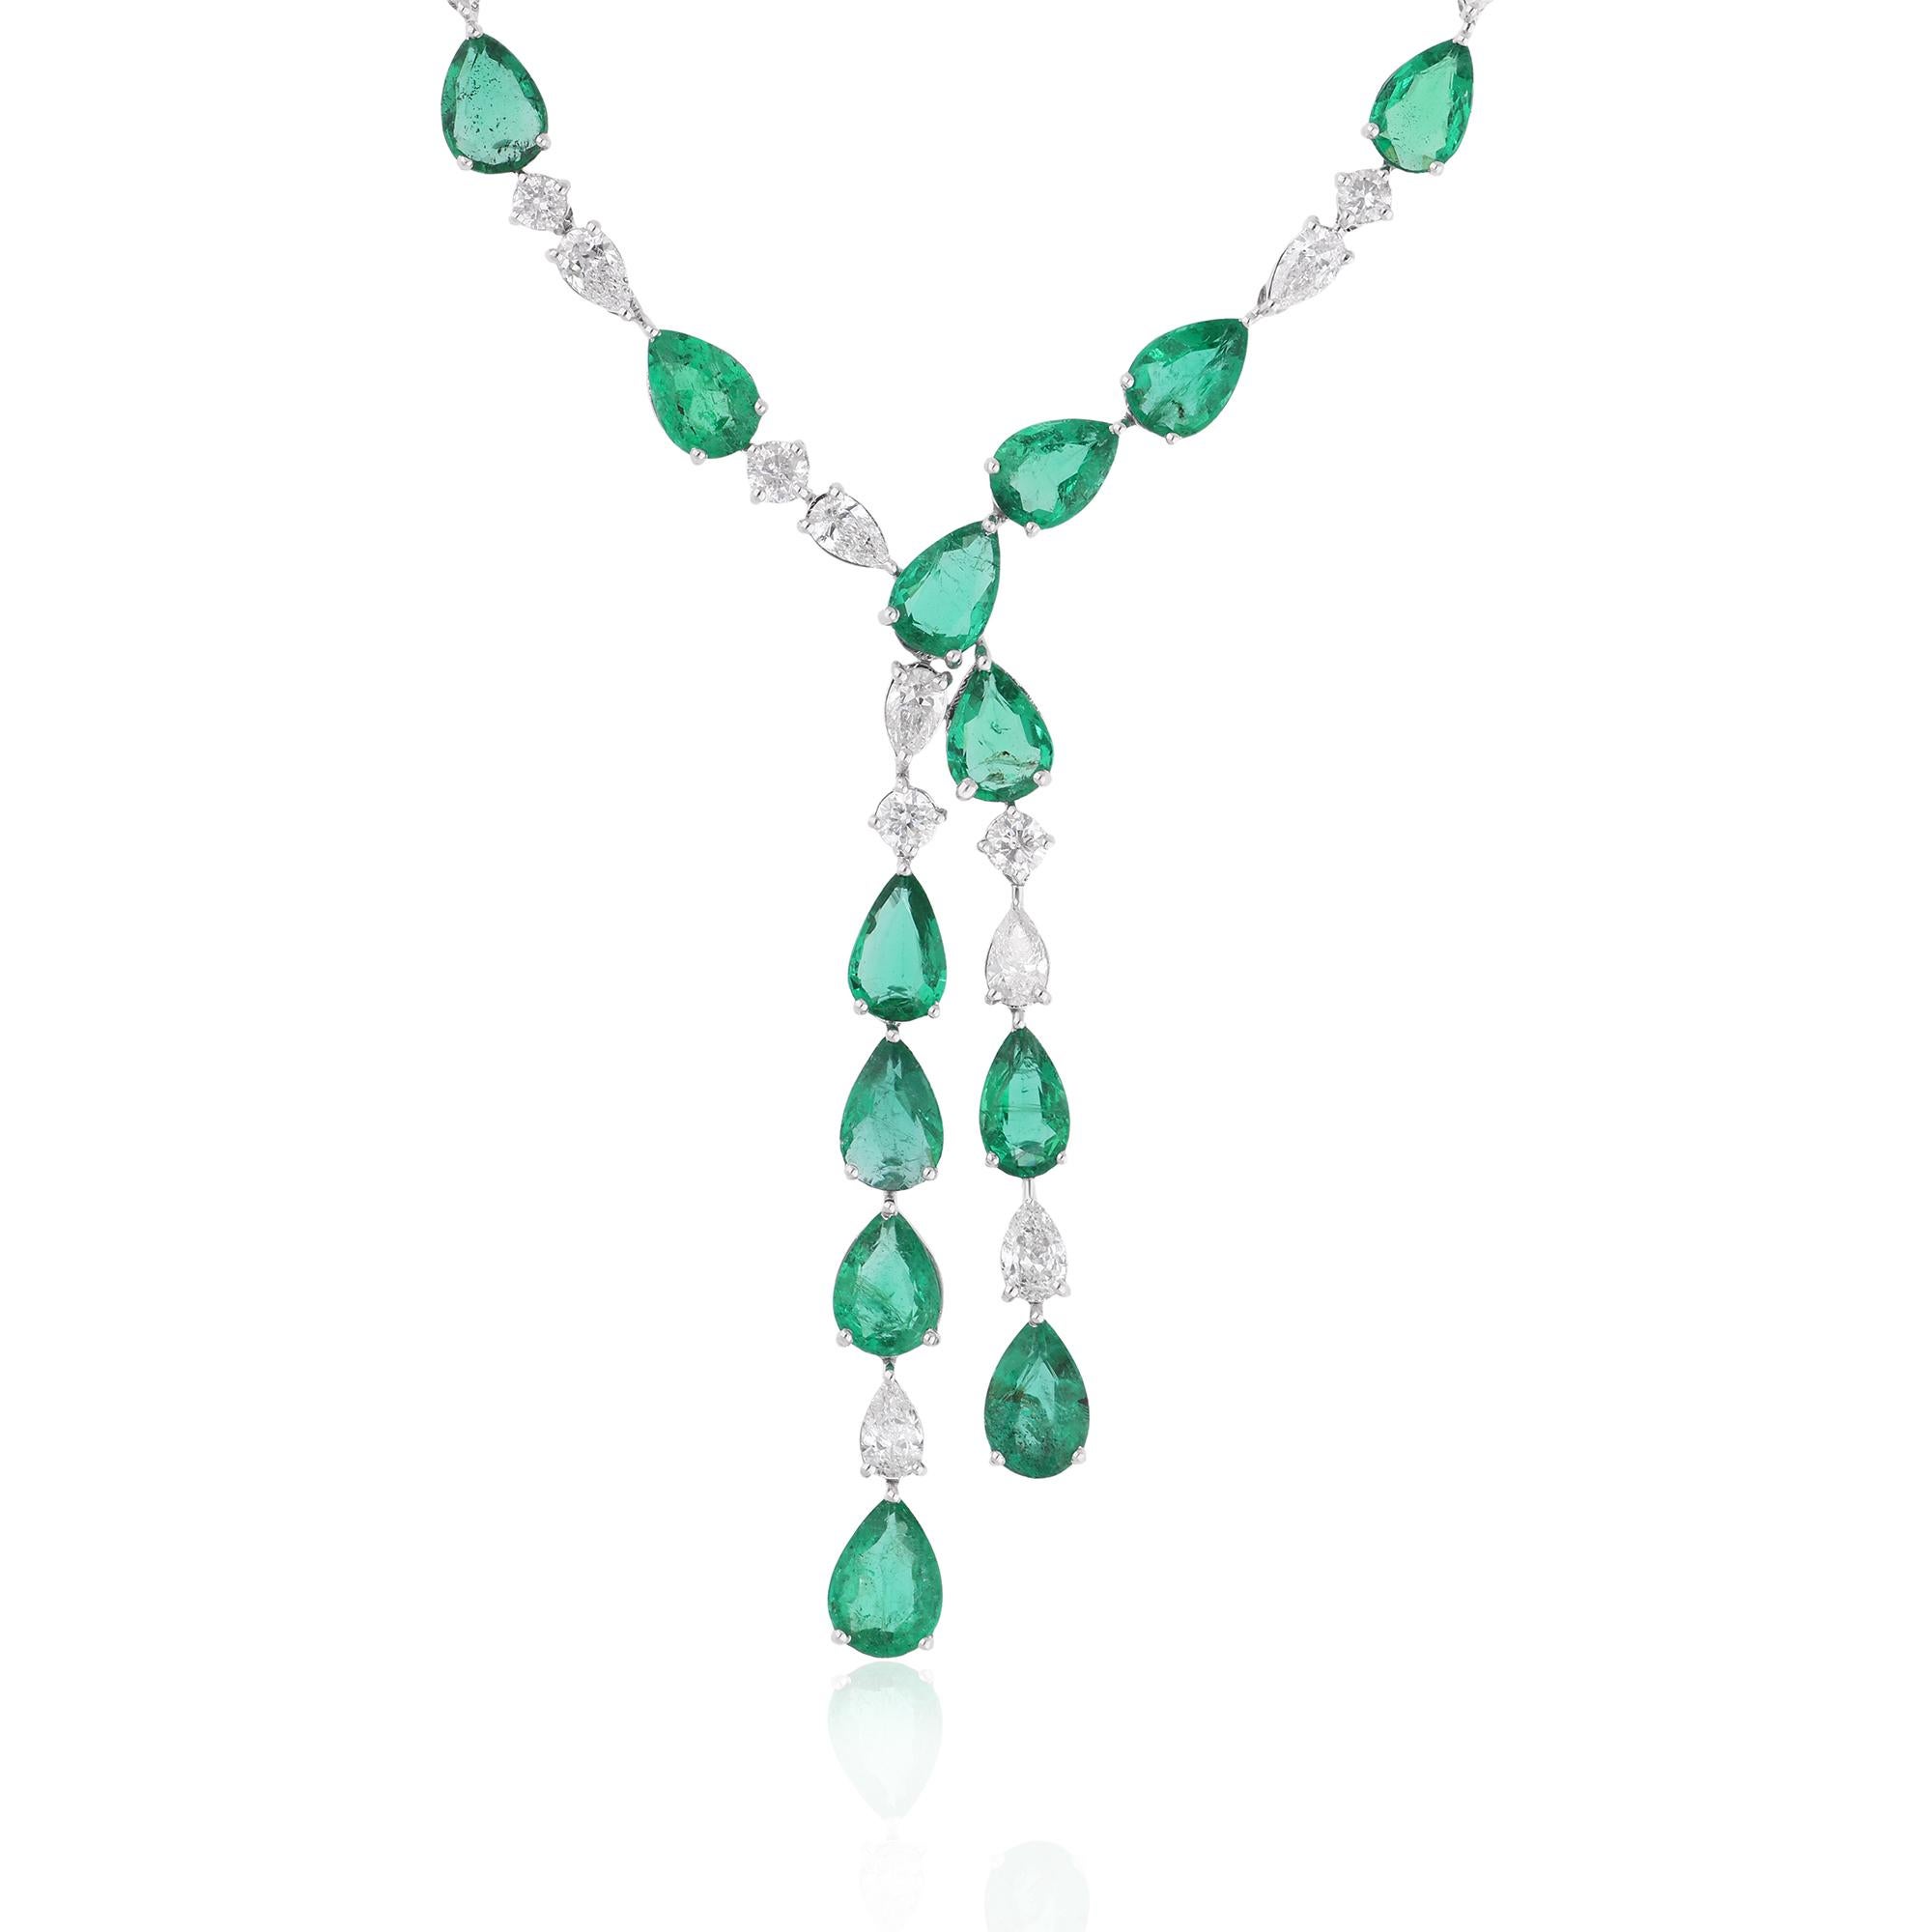 Introducing a stunning blend of sophistication and luxury: the Natural Zambian Pear Emerald SI/H Diamond Lariat Necklace, meticulously crafted in lustrous 18 Karat White Gold. This exquisite necklace is a true masterpiece of fine jewelry, designed